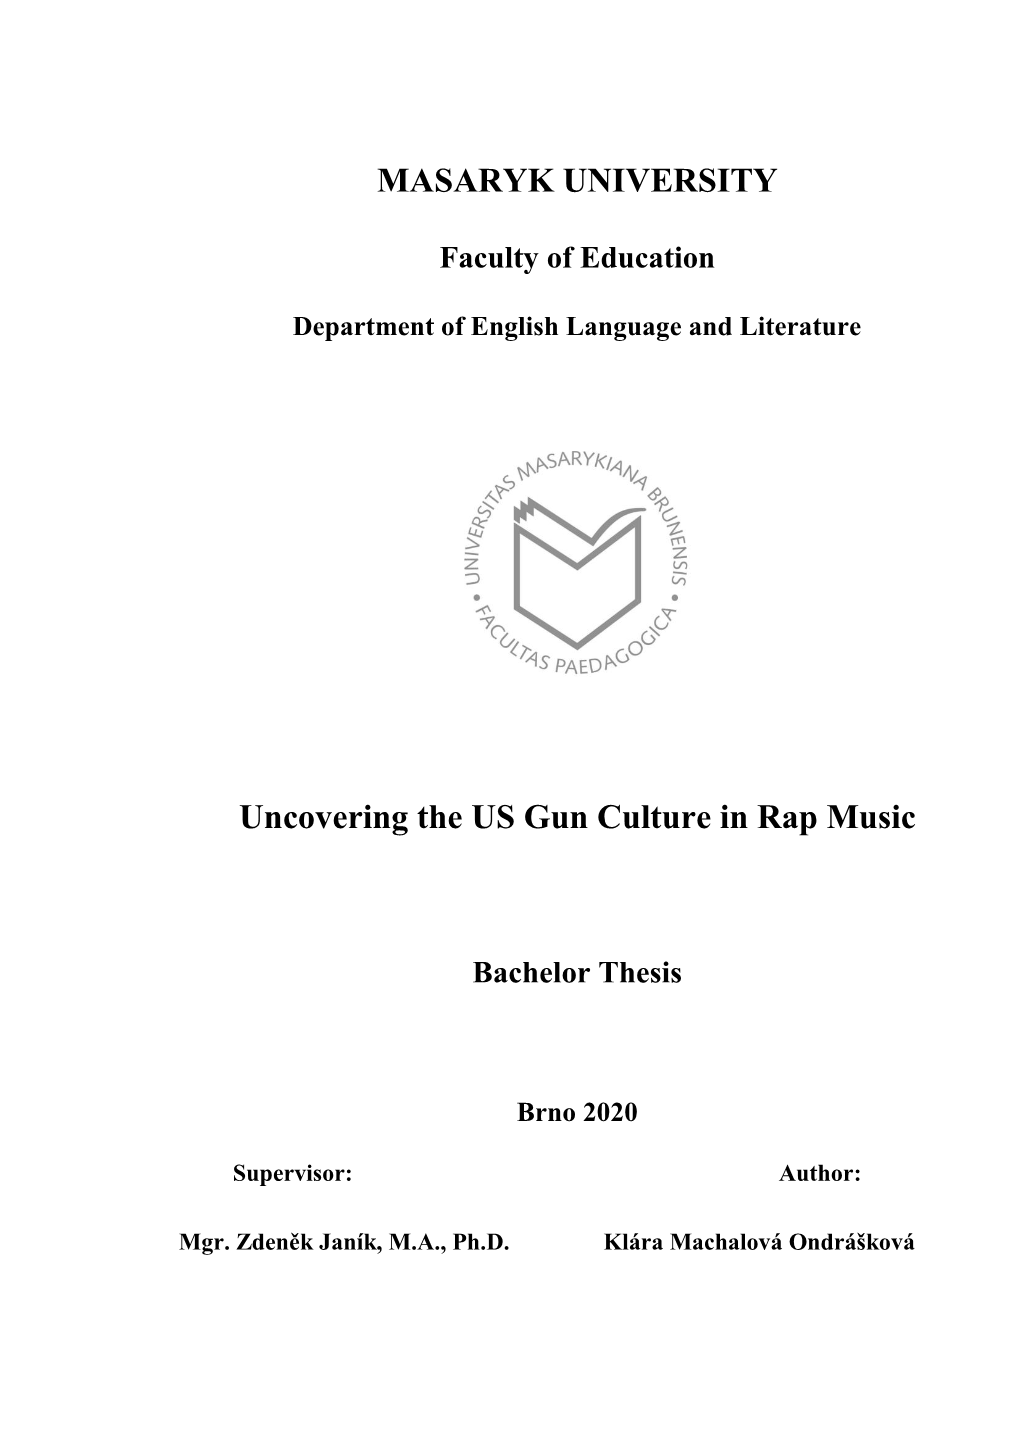 MASARYK UNIVERSITY Uncovering the US Gun Culture in Rap Music